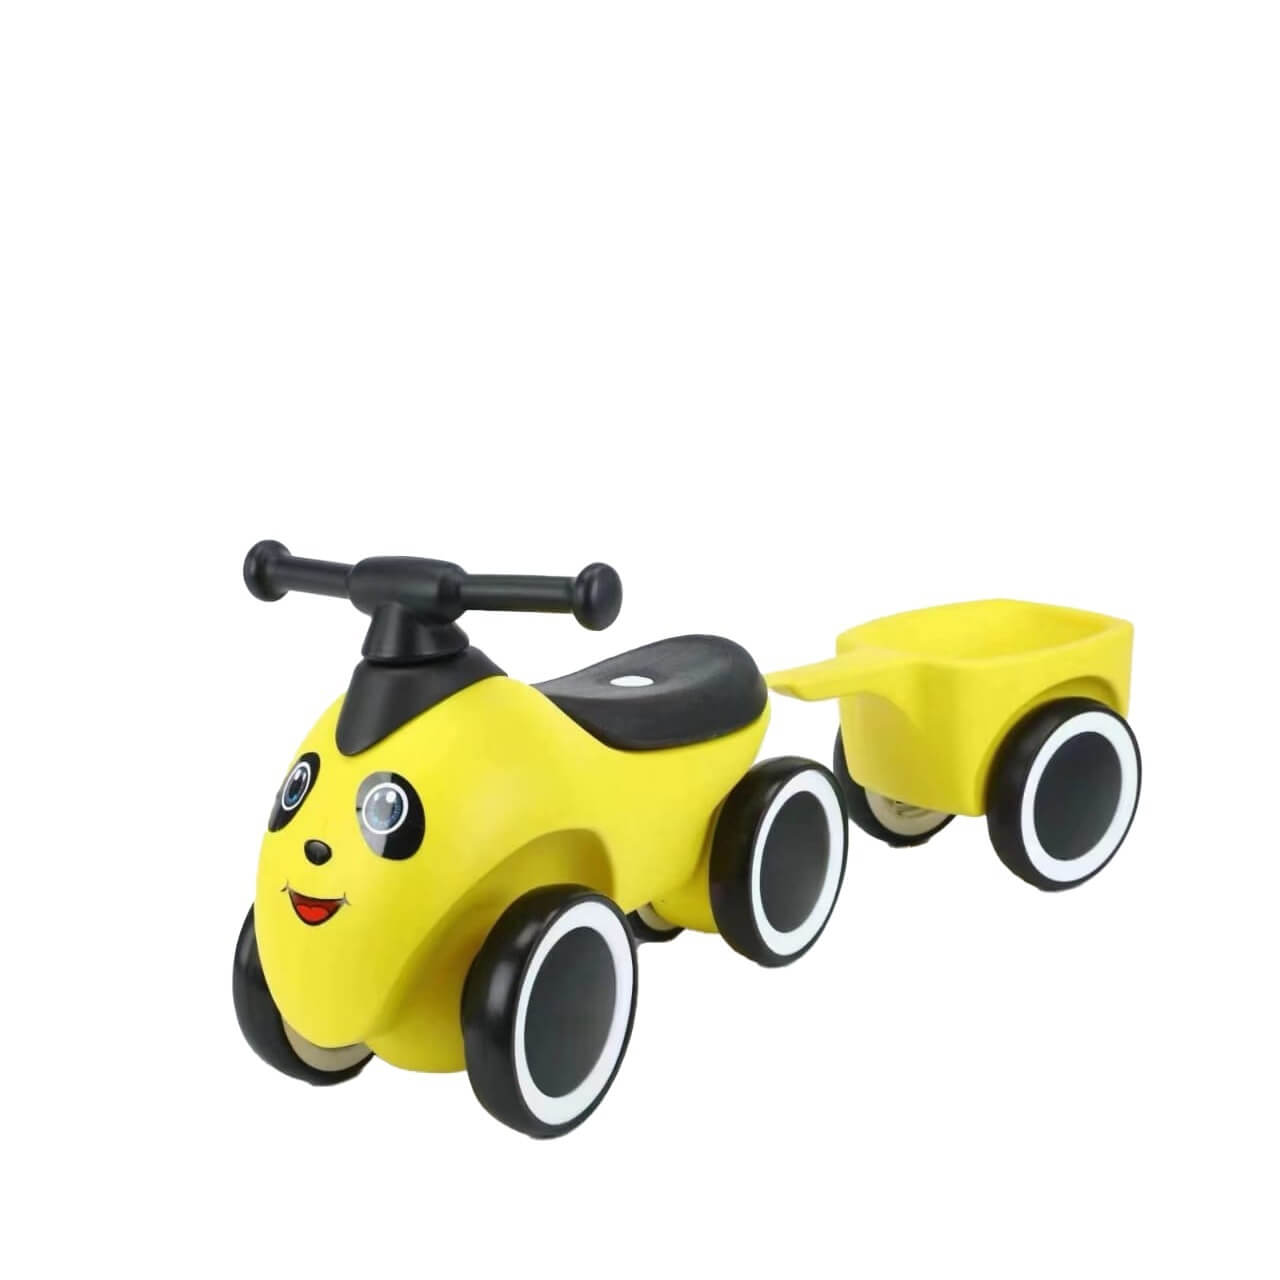 Ride along  yellow Push car with trailor for toys